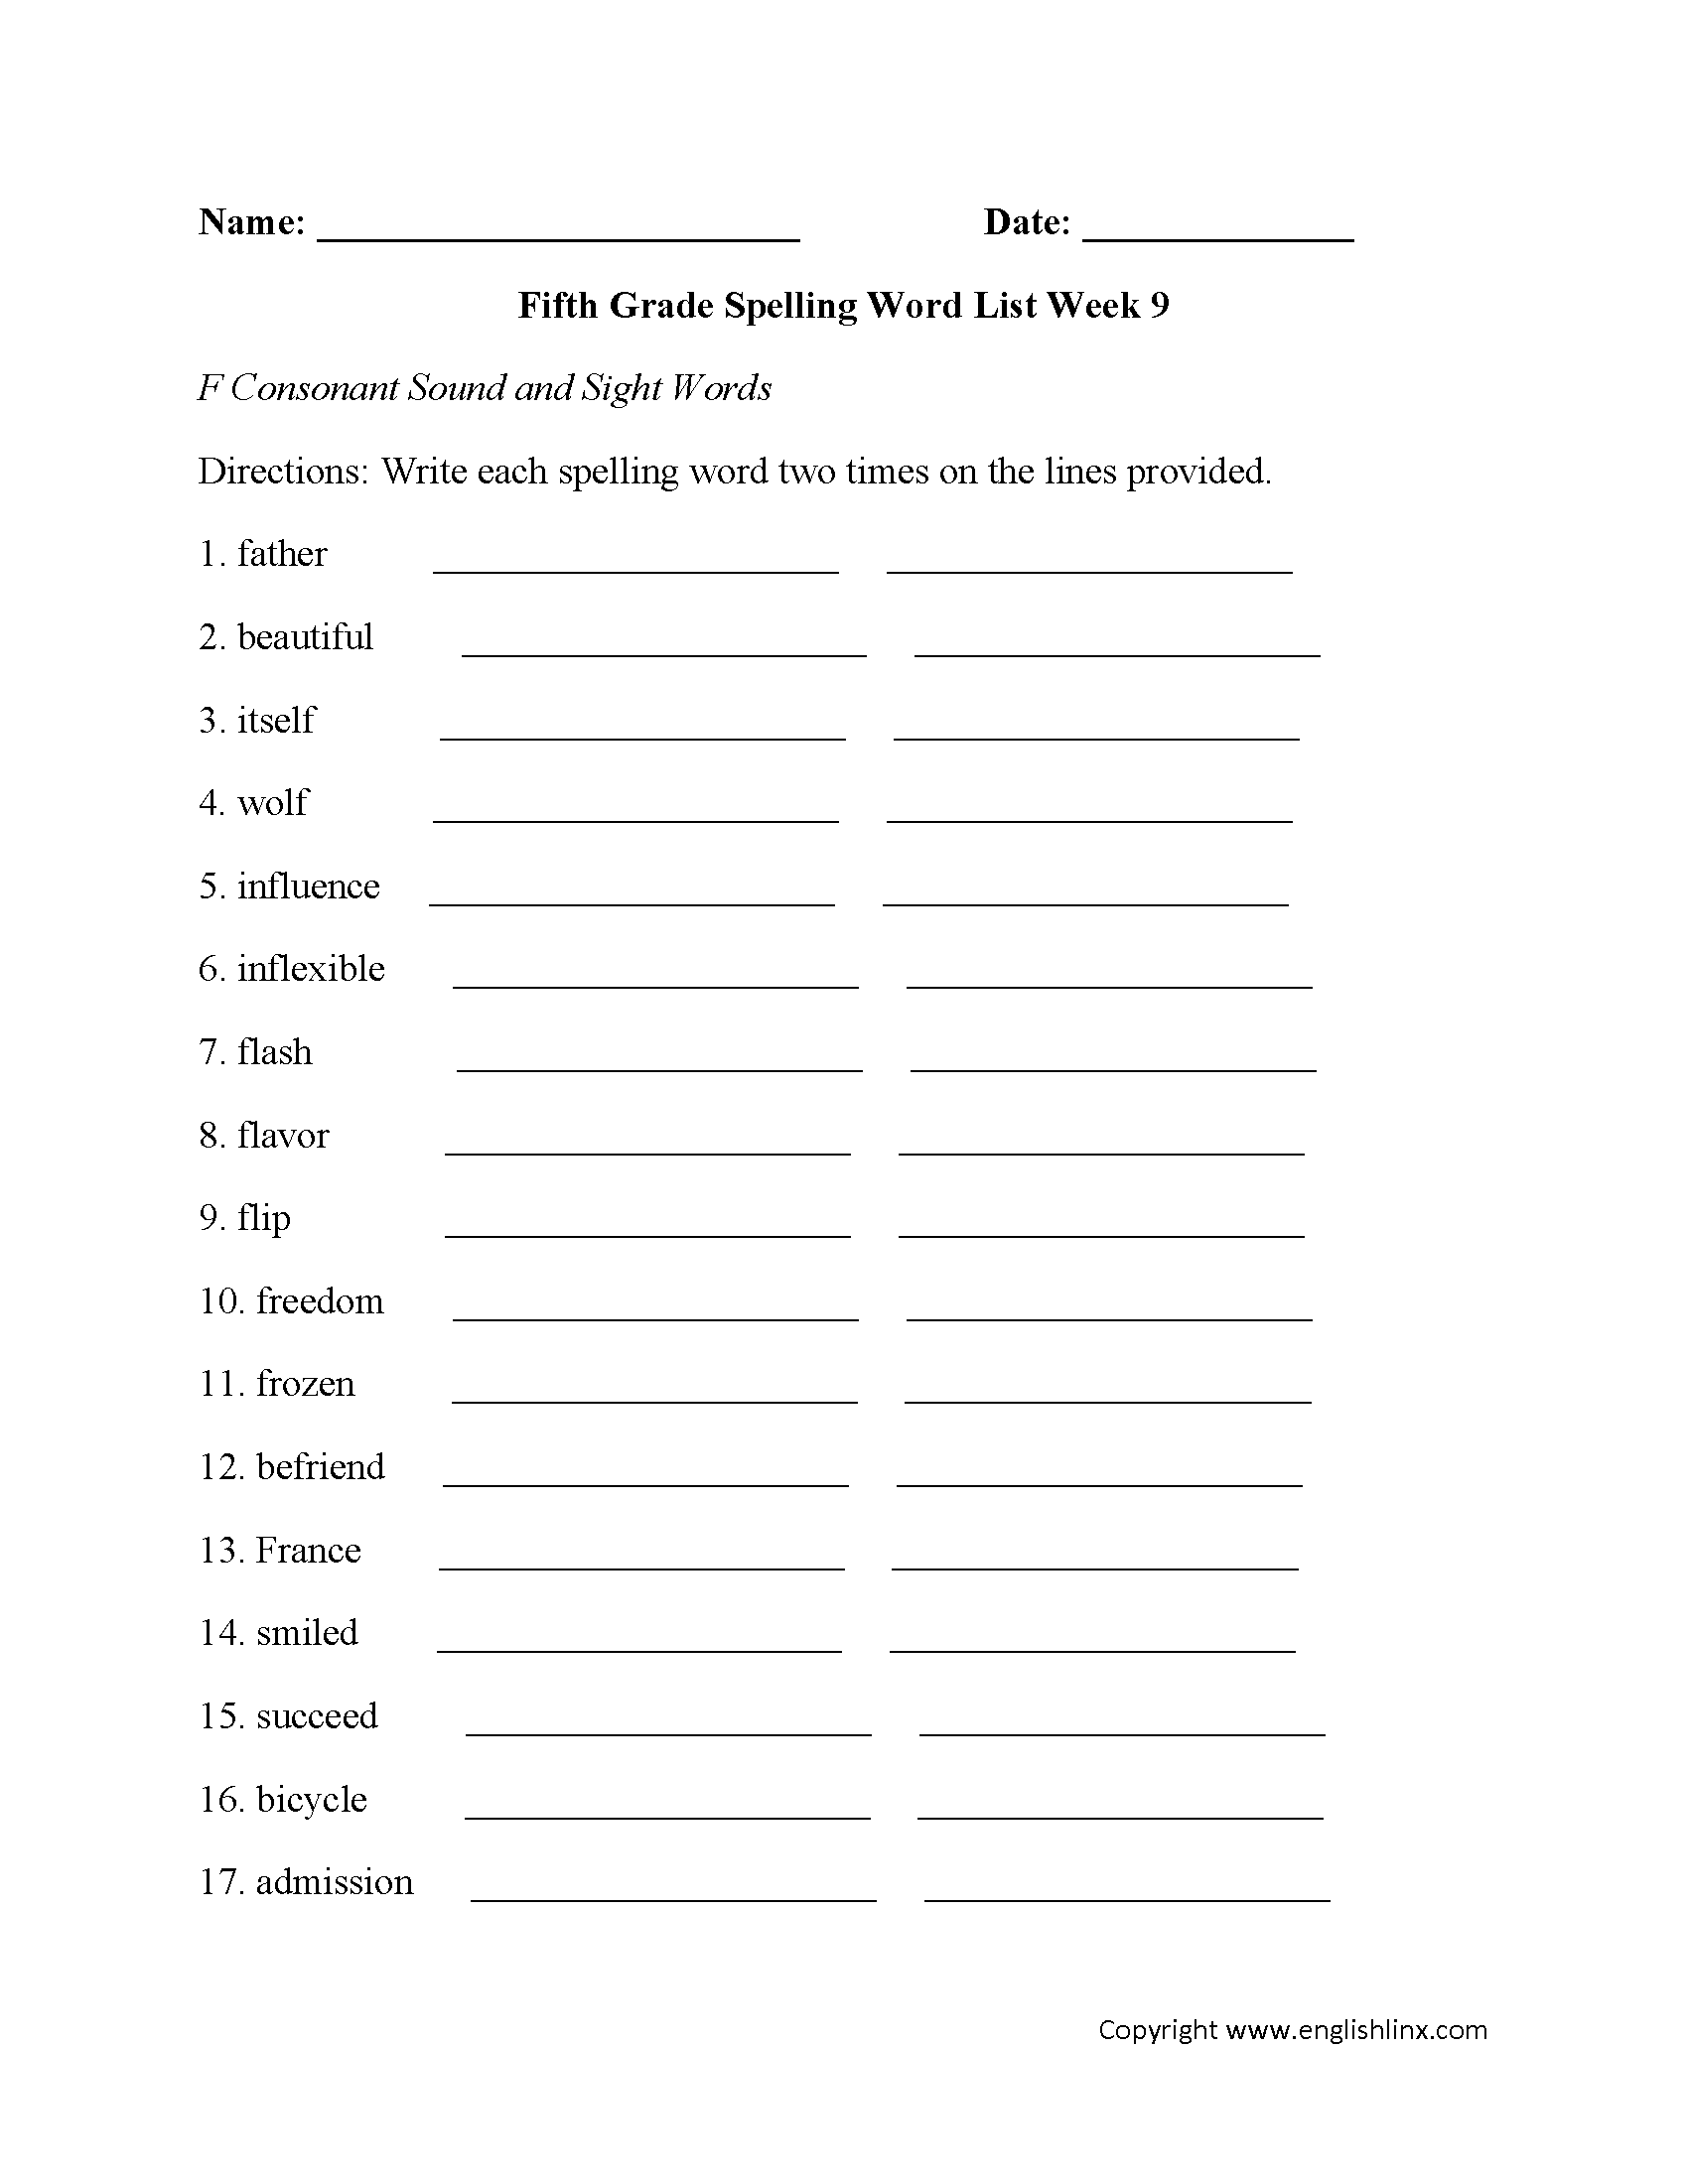 Week 9 F Consonant and Sight Words Fifth Grade Spelling Words Worksheets